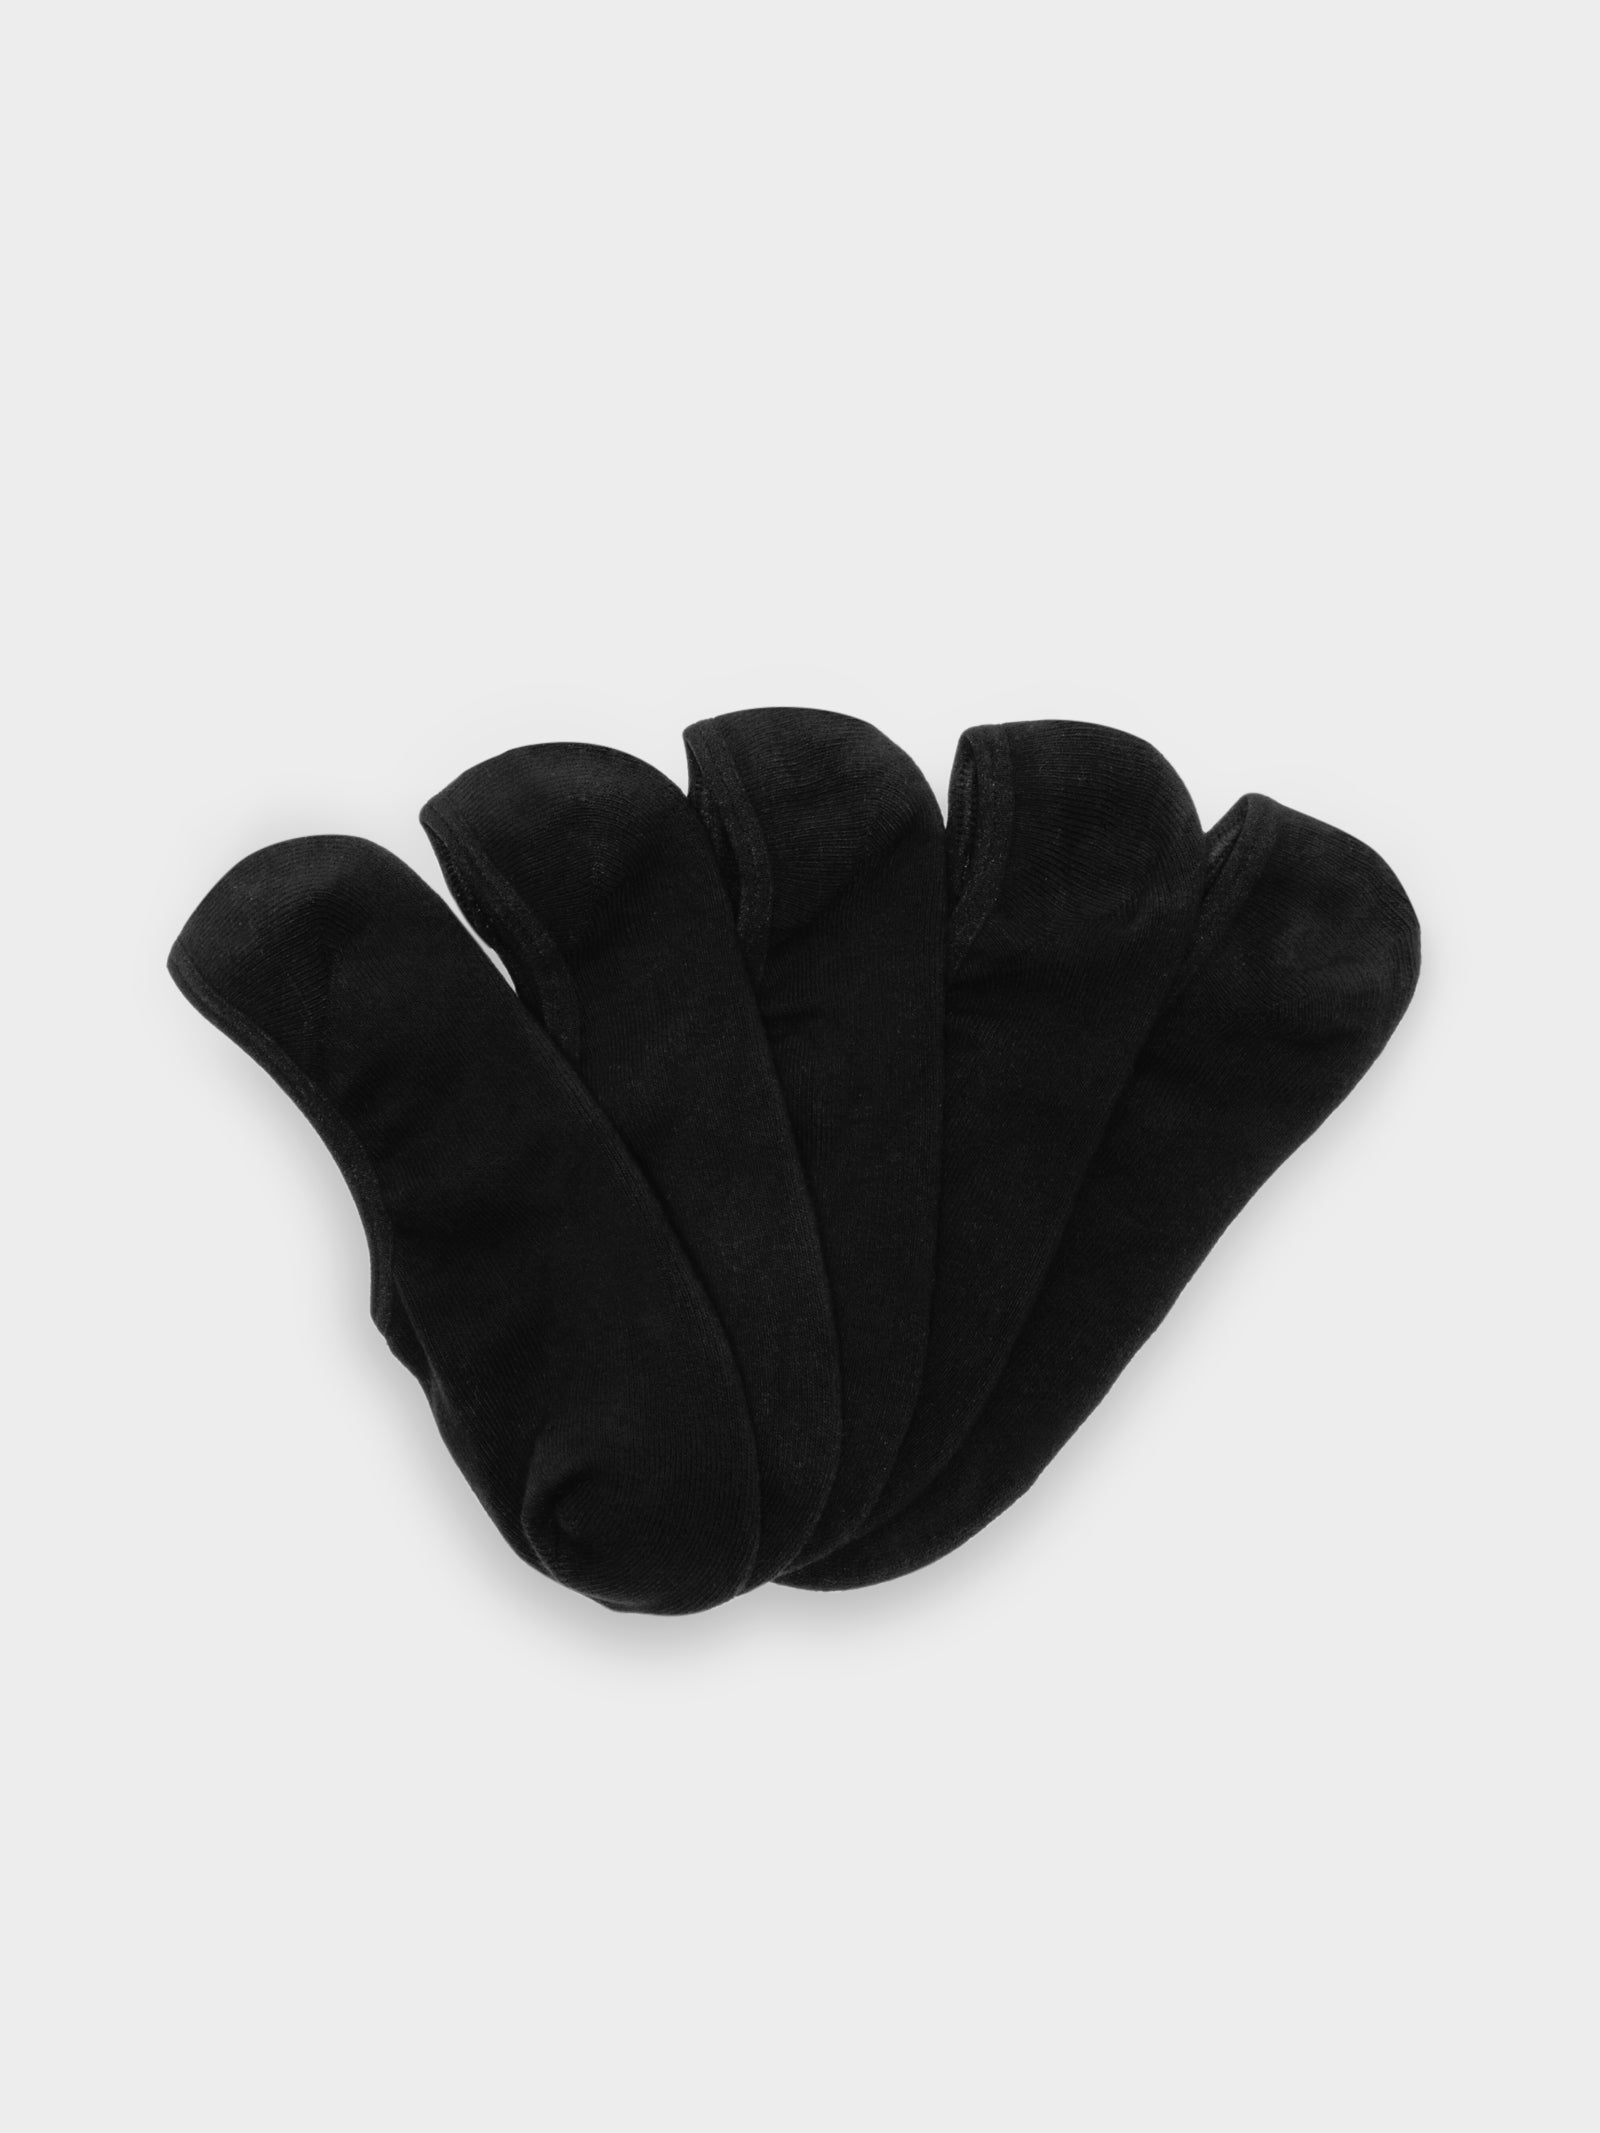 5 Pairs of Invisible Socks in Black